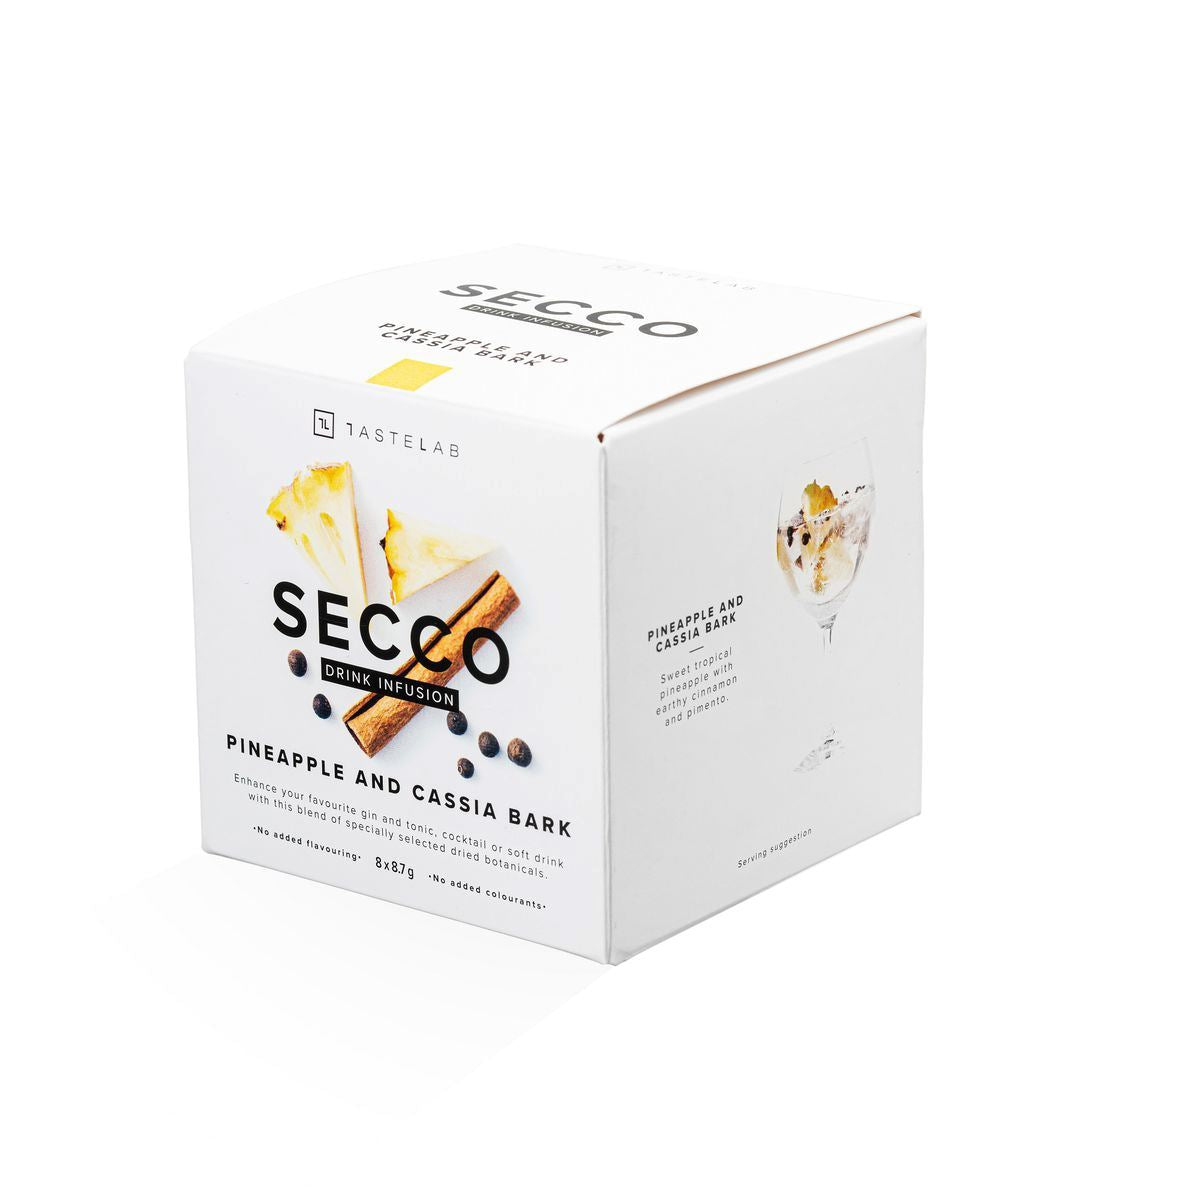 Secco Pineapple & Cassia Bark Drink Infusion Garnishes & Infusions Tastelab 